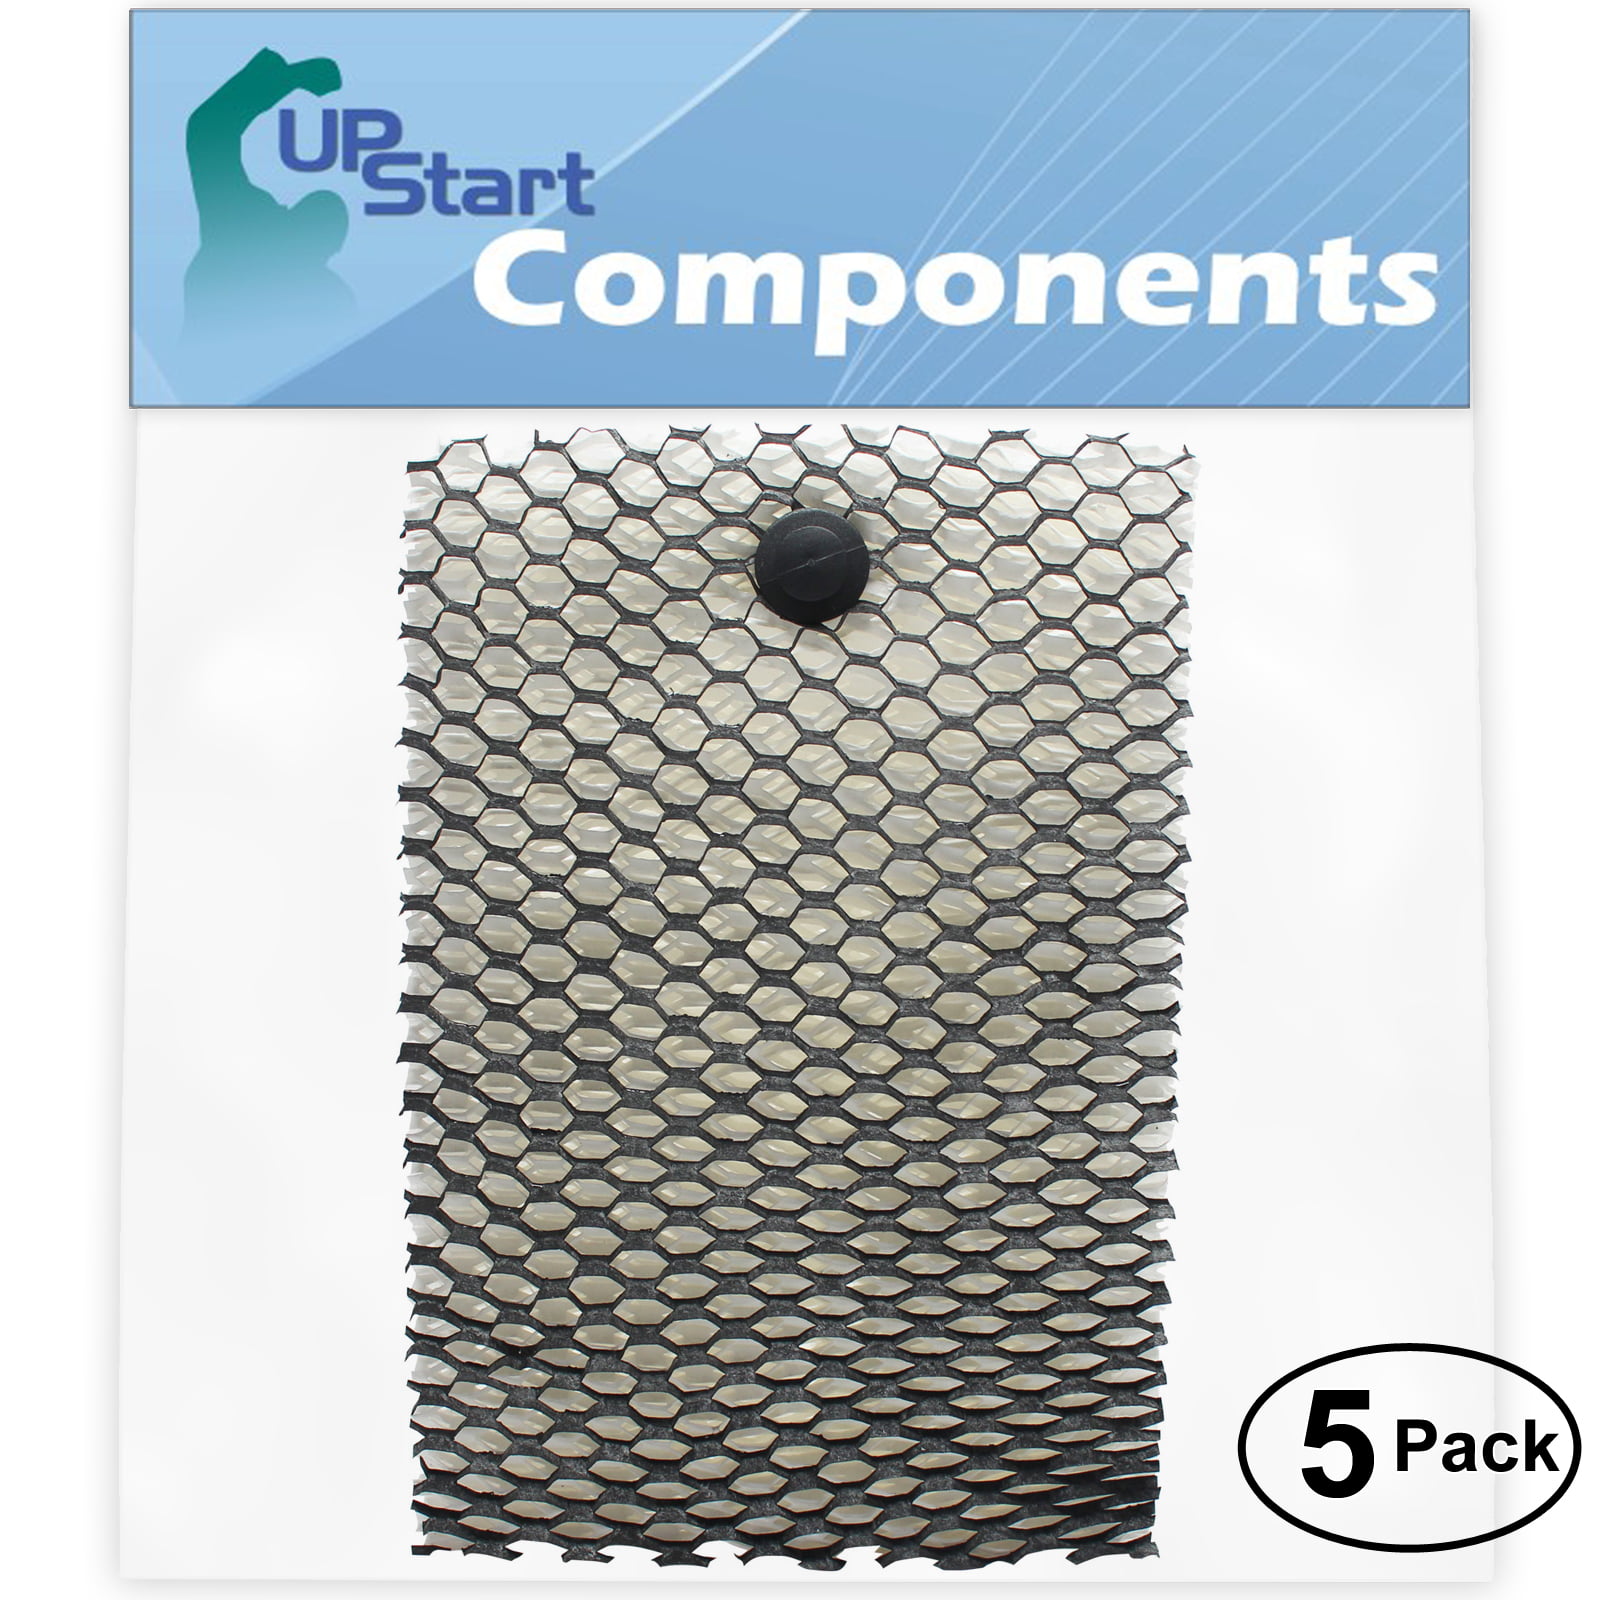 2845,Holmes W6 3x Humidifier Filter for Bionaire  WC0840 